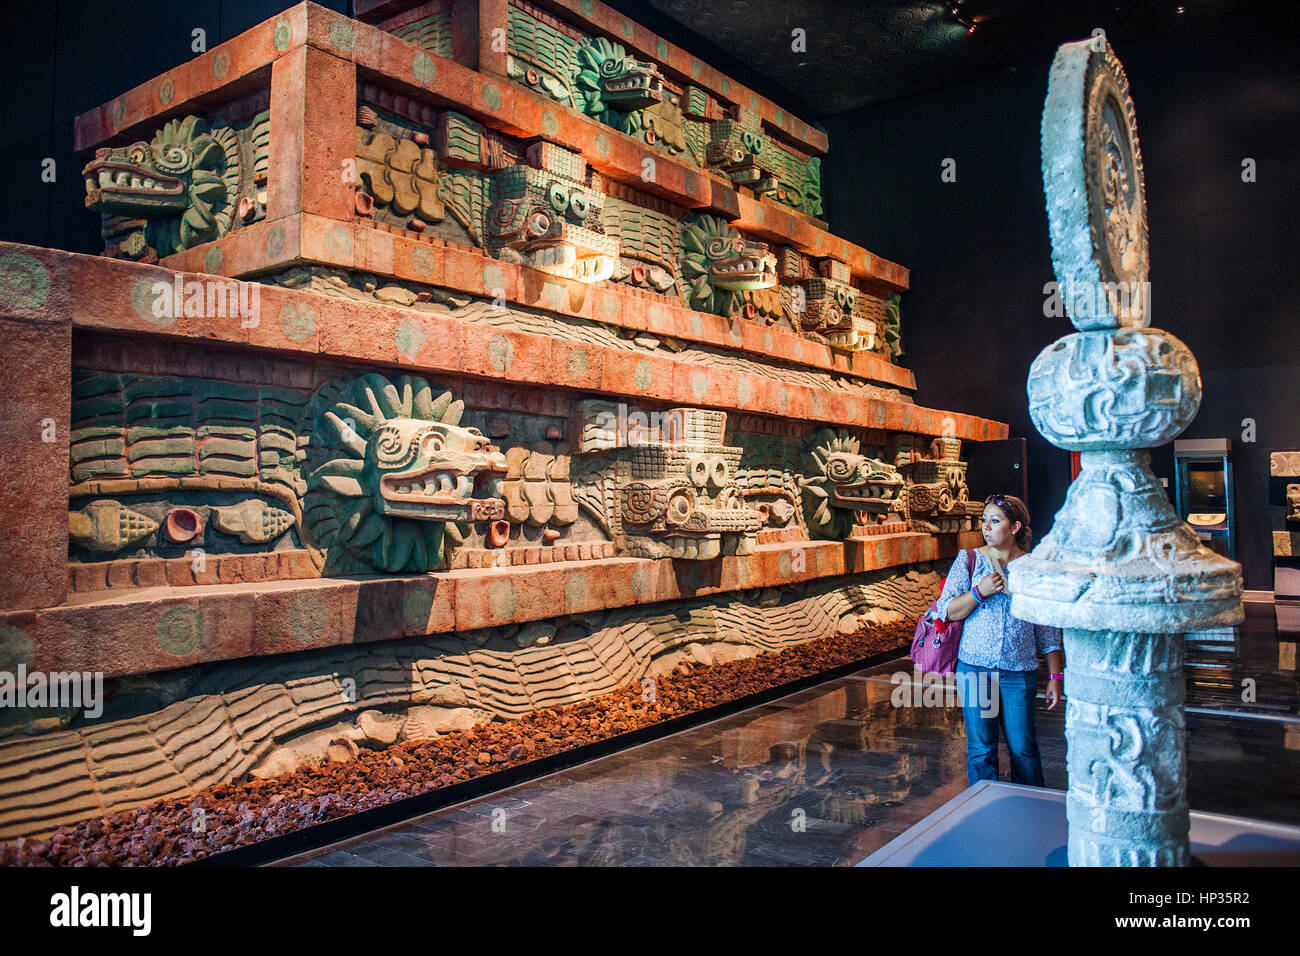 Replica, `Piramide de la serpiente emplumada´, Pyramid of the Feathered Serpent, or snake,from Teotihuacan, National Museum Anthropology. Mexico City. Stock Photo